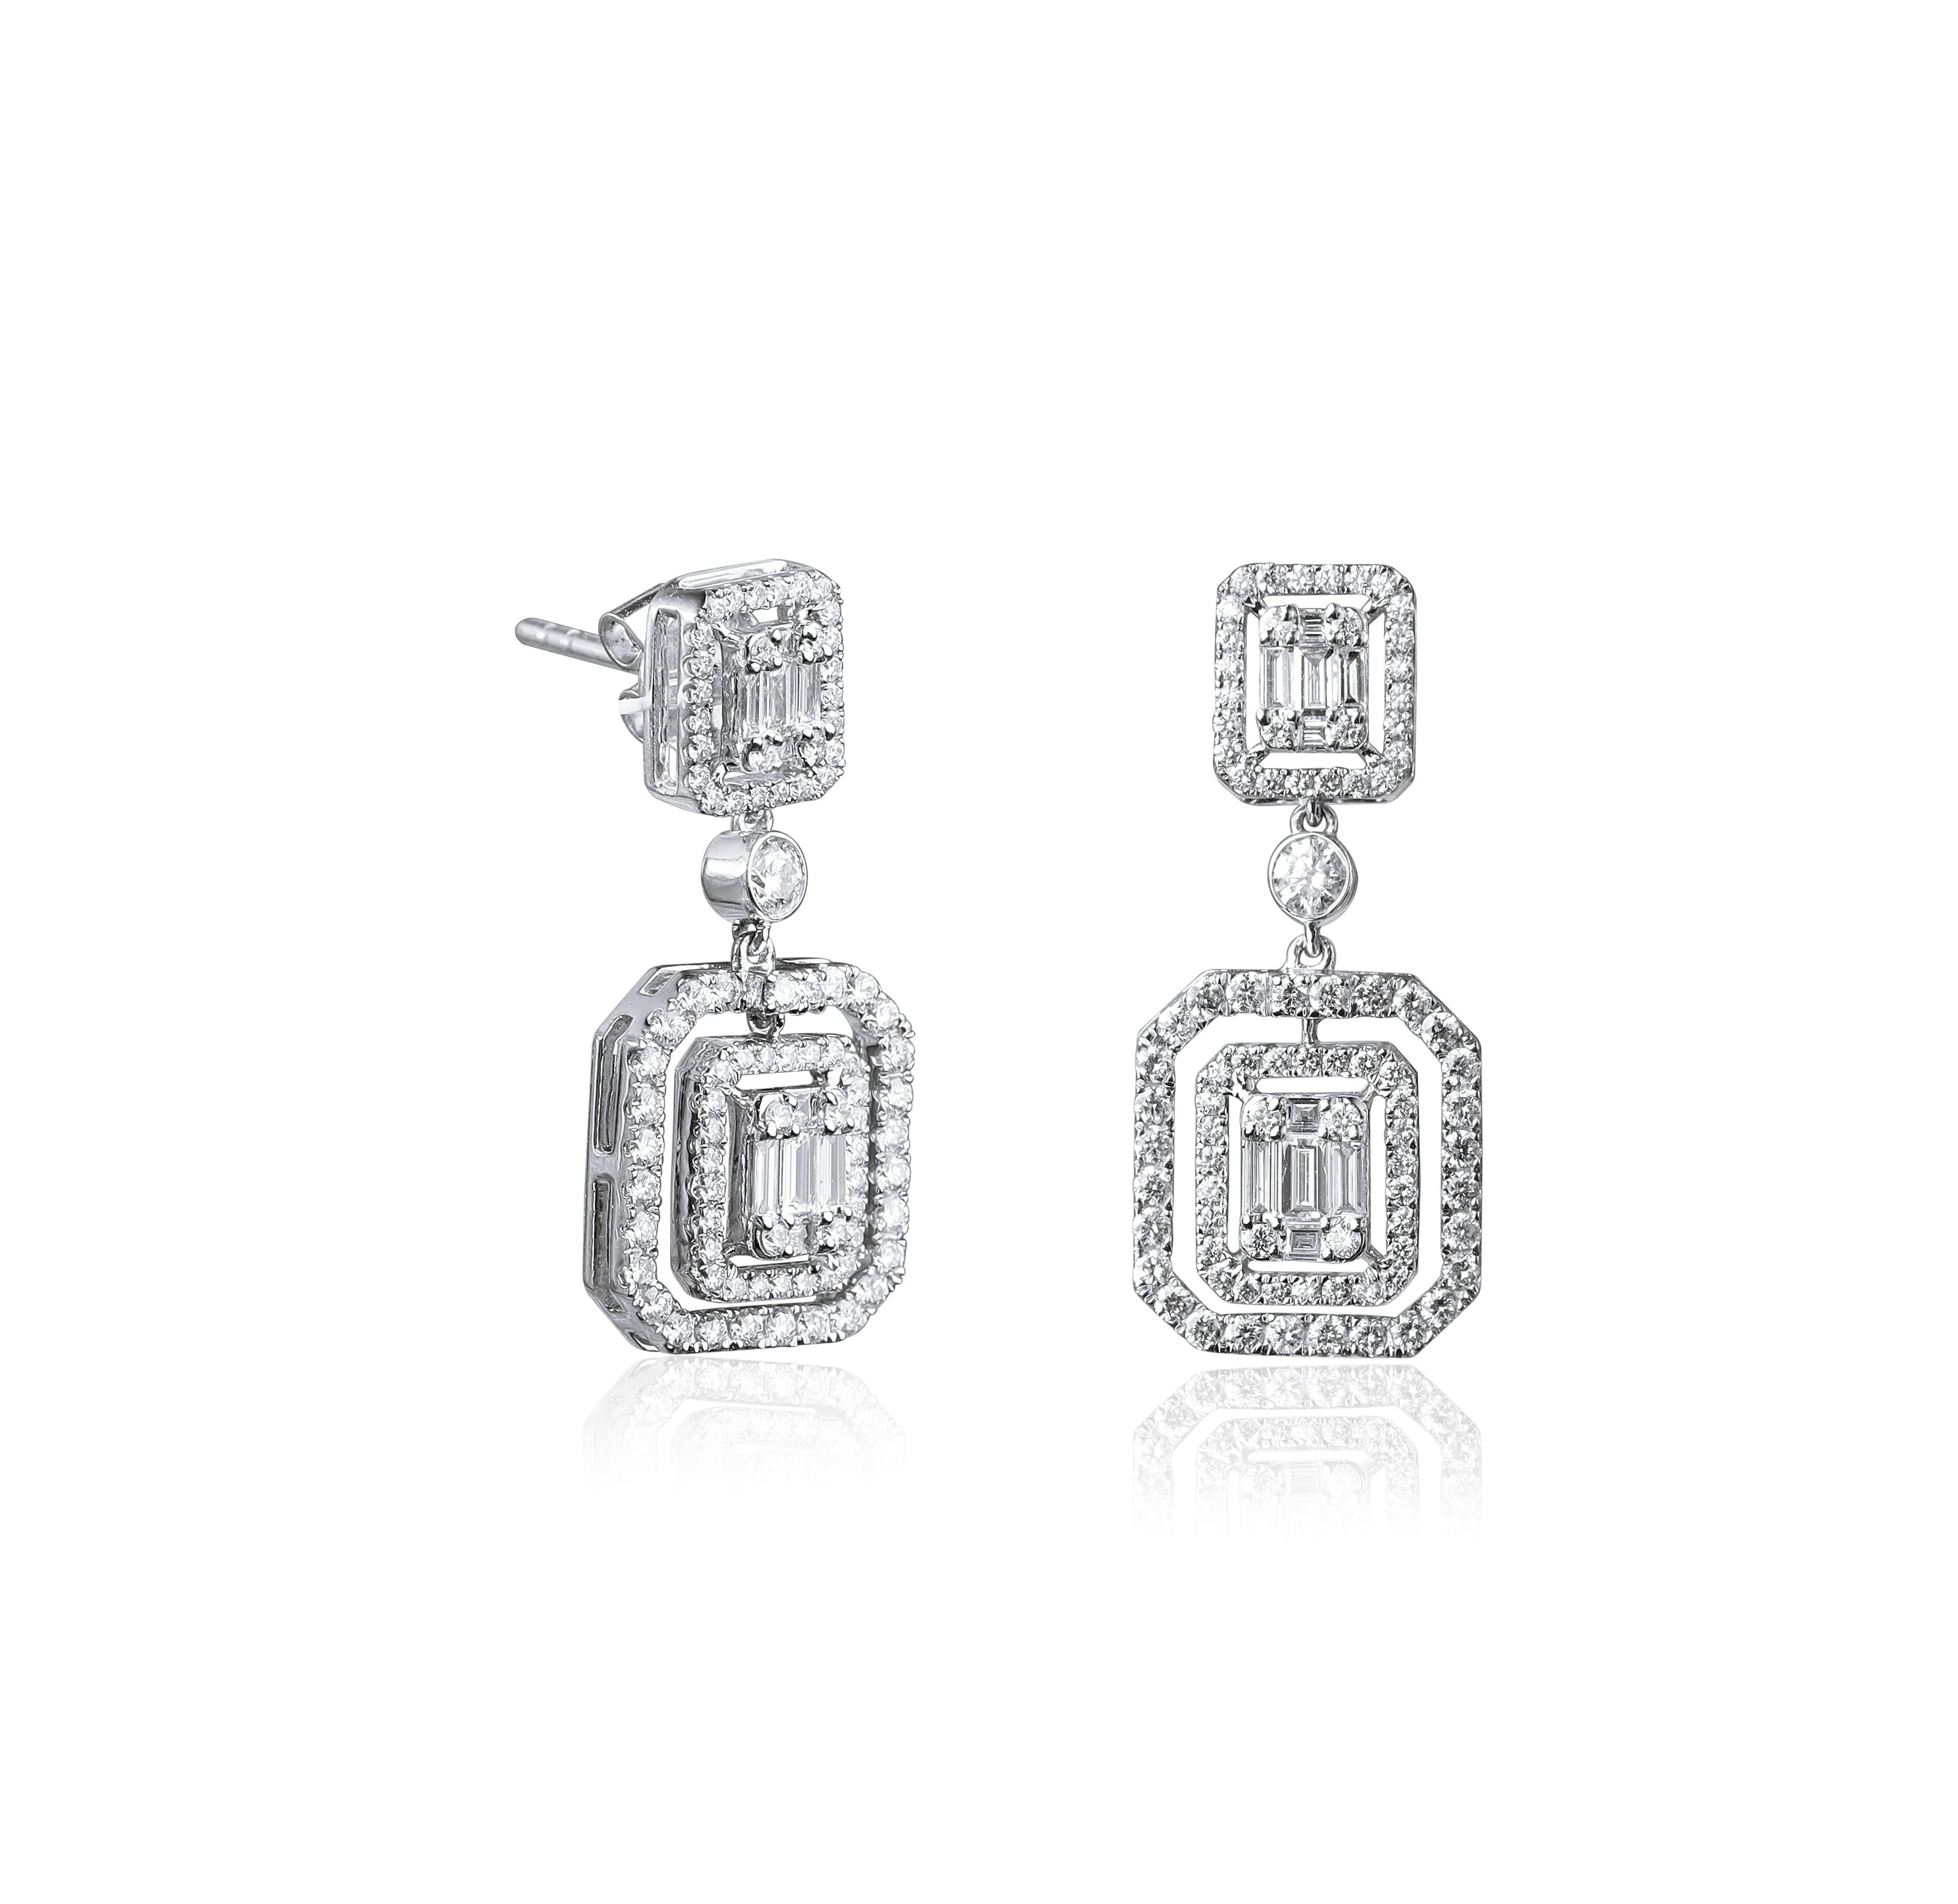 1.7 Carat Art Deco Diamond Baguette Cut Earrings with Illusion Setting, G VS In New Condition For Sale In Jaipur, RJ